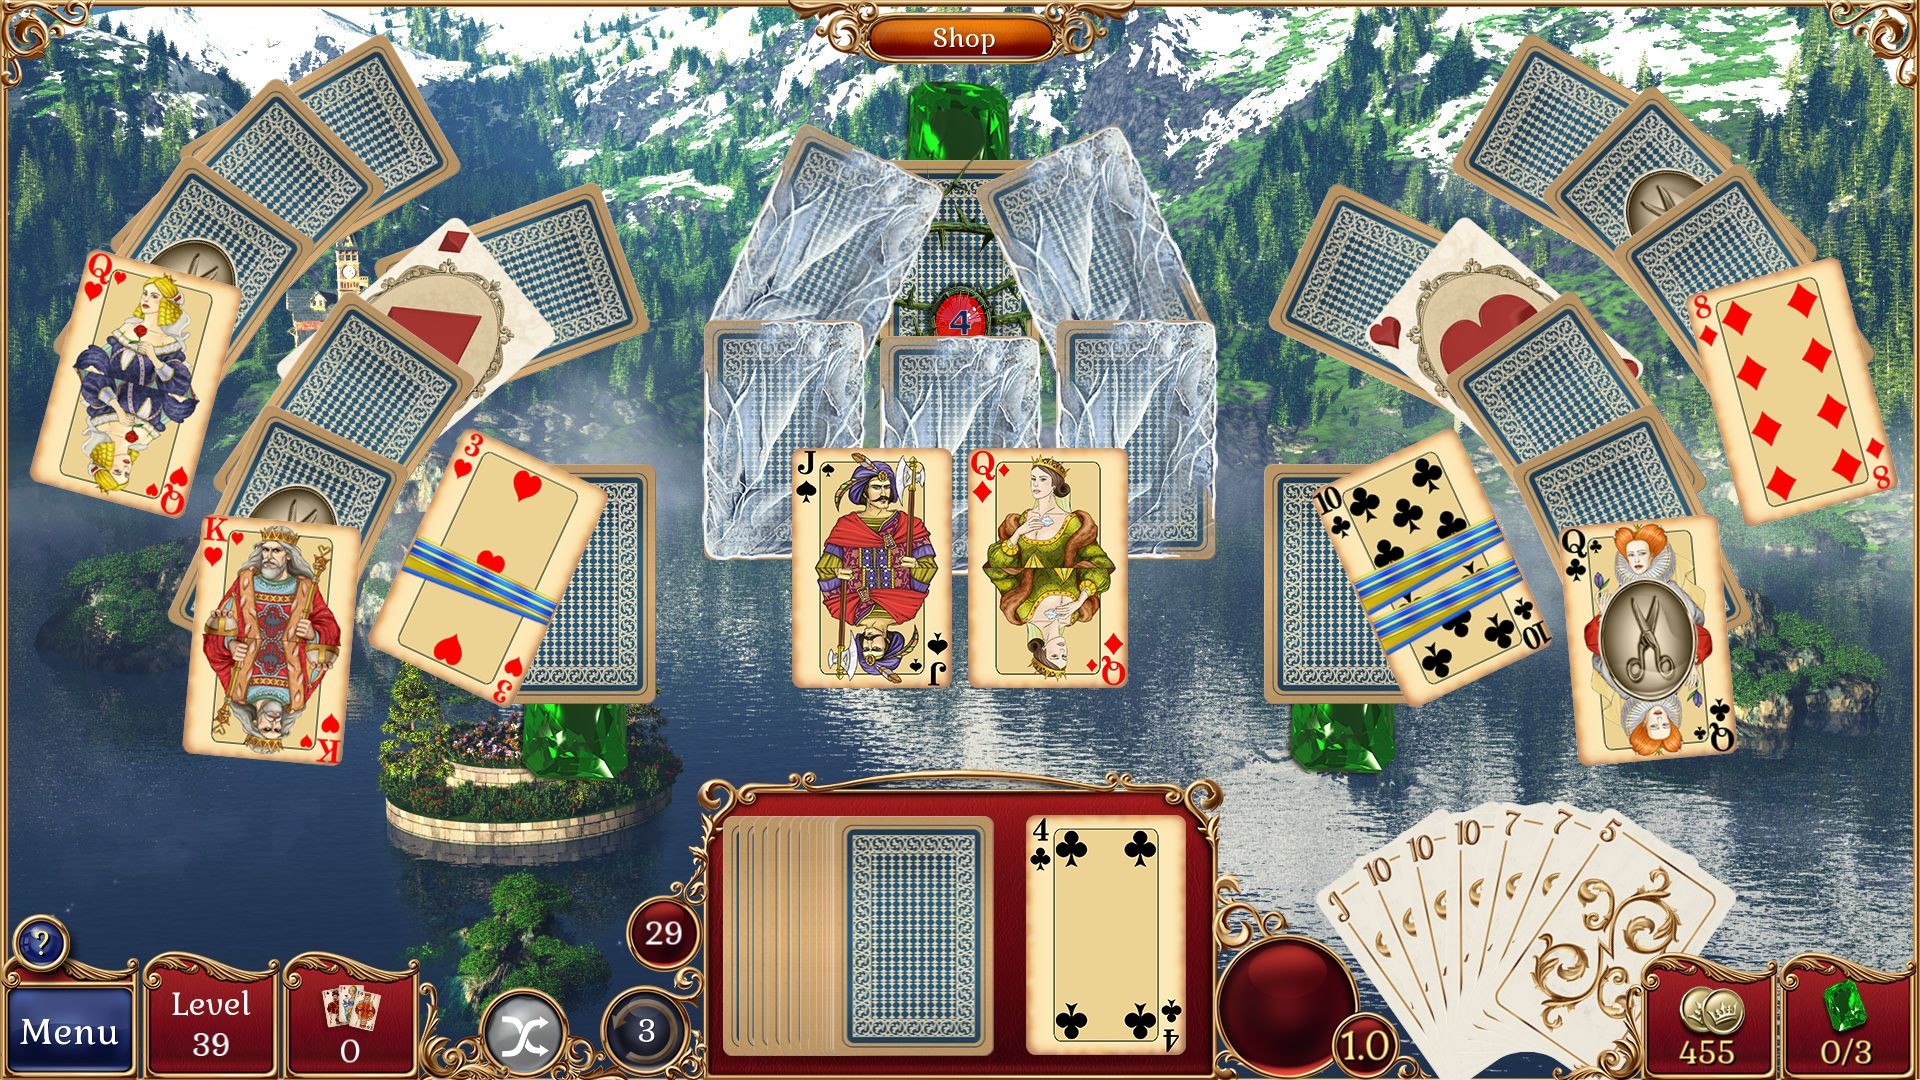 Jewel Match Solitaire X Collector's Edition Steam CD Key 5.64 $